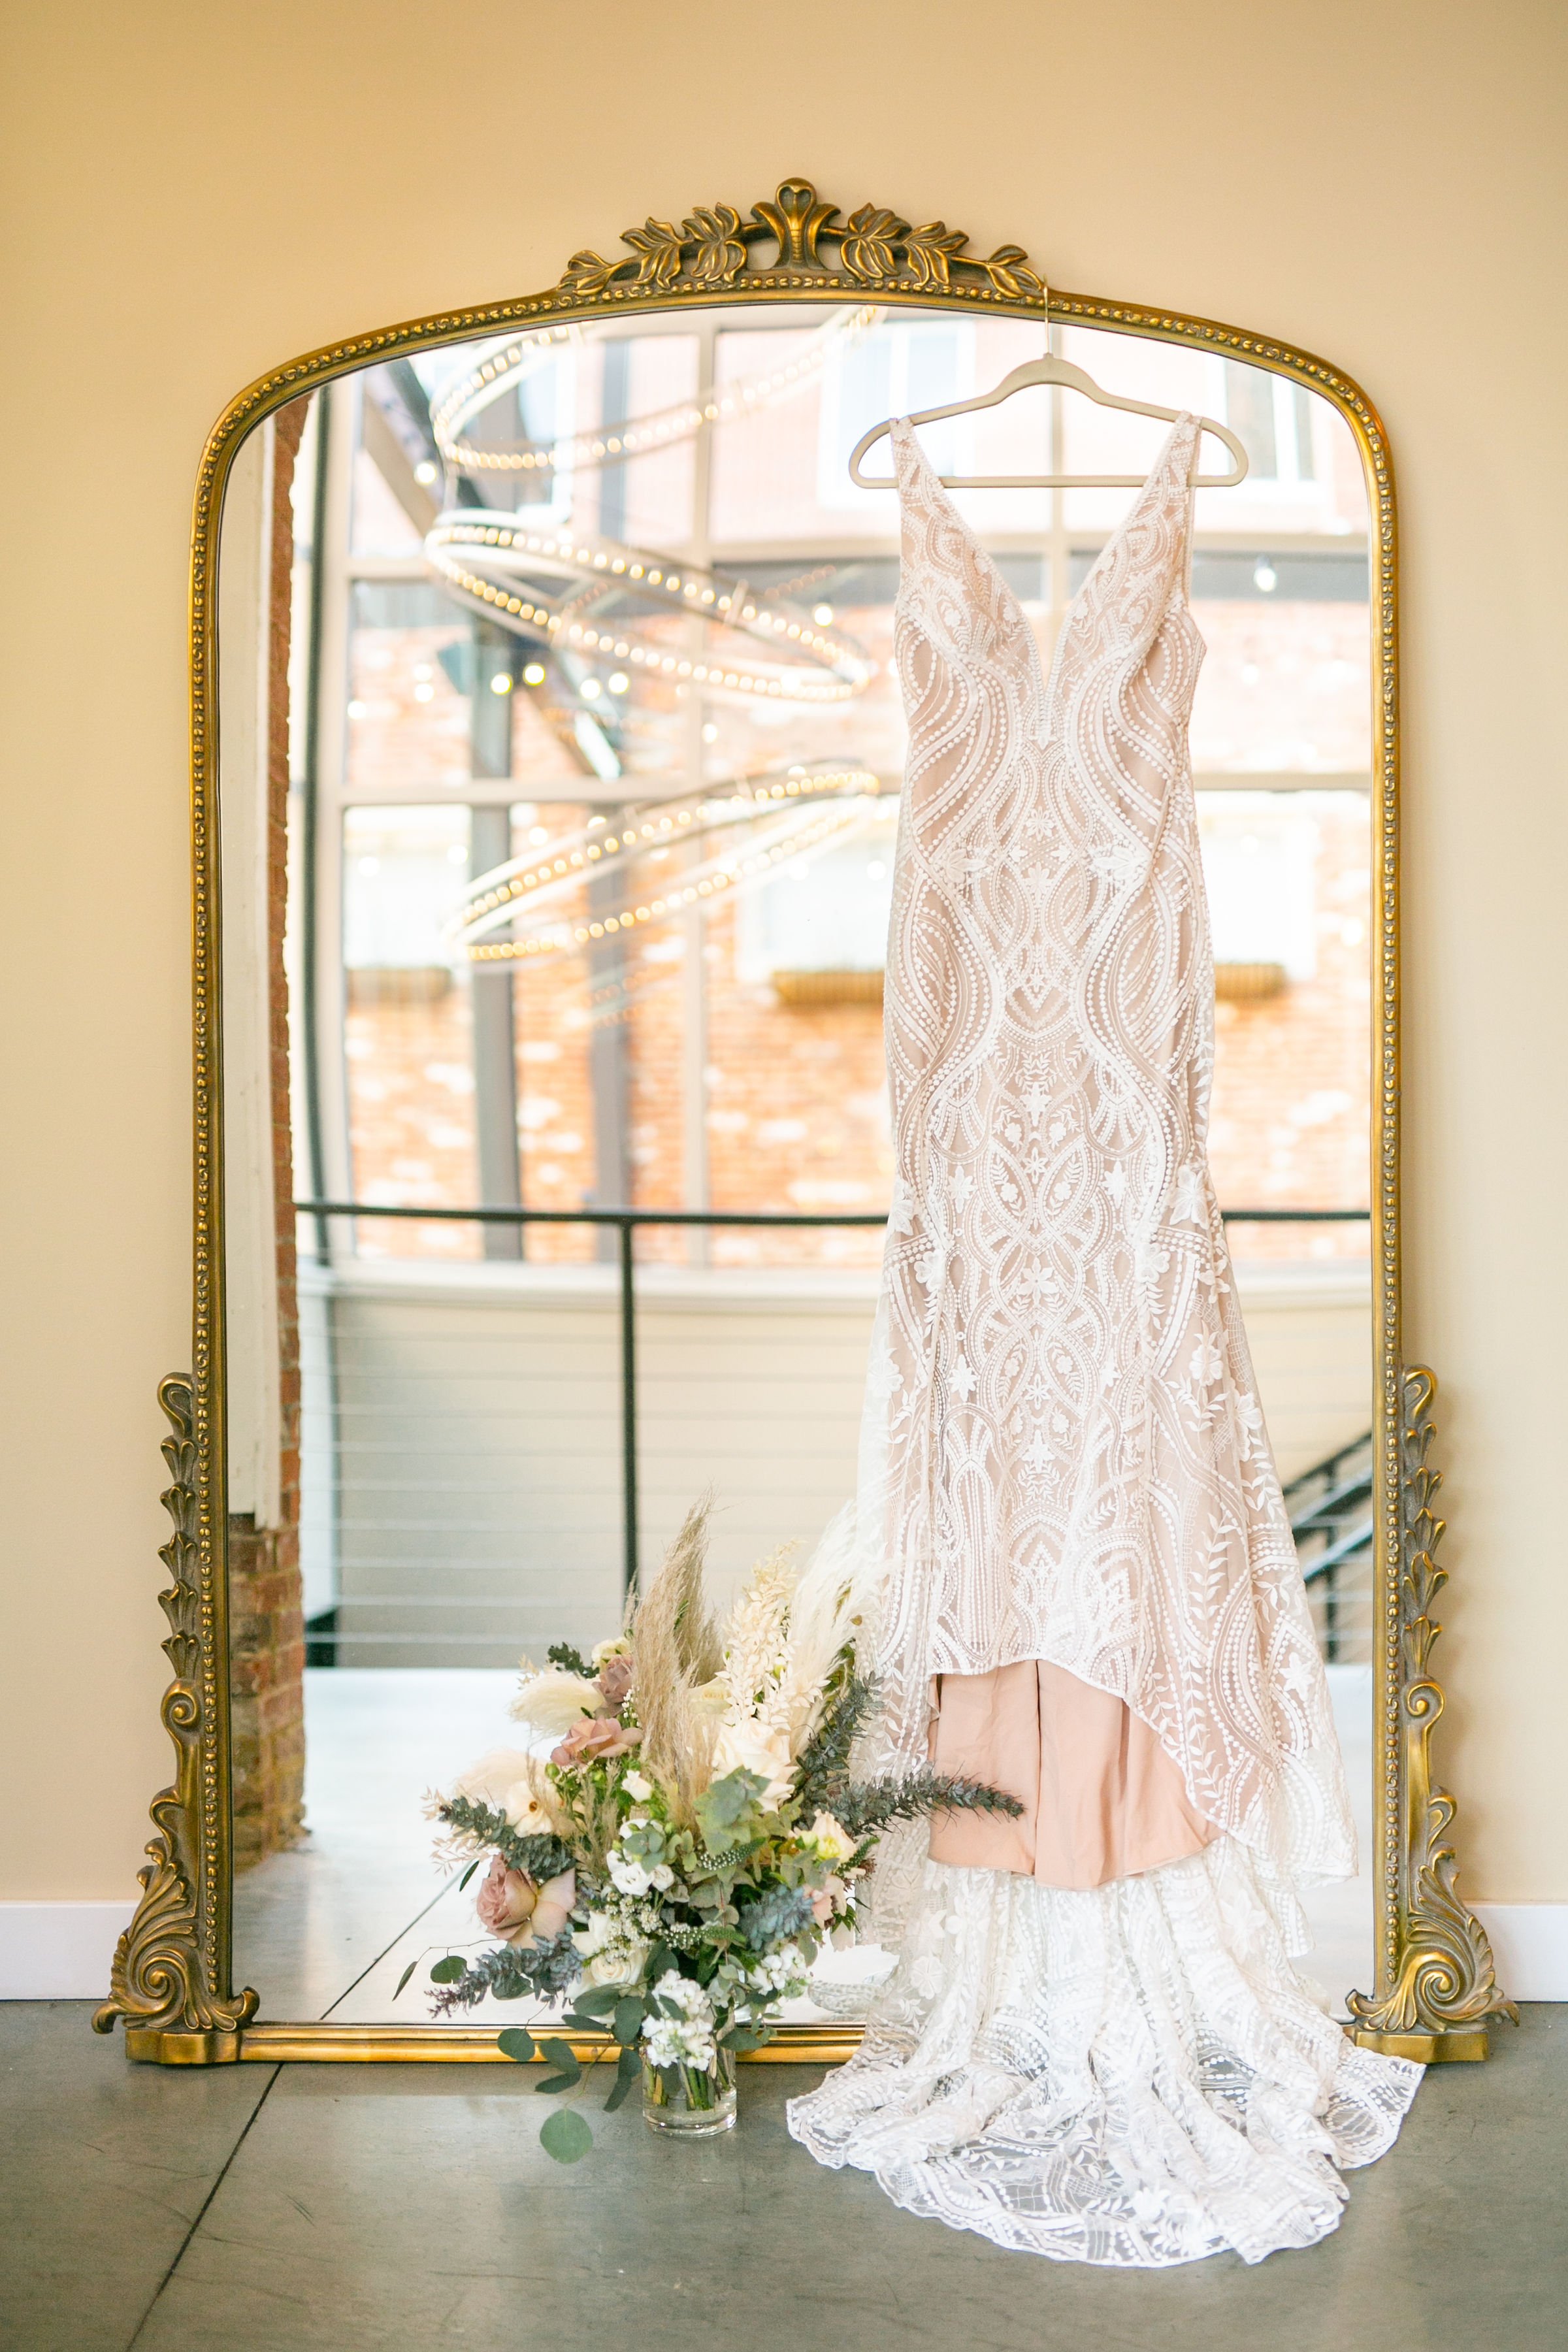 Sparkly bridal gown hanging from large floor mirror